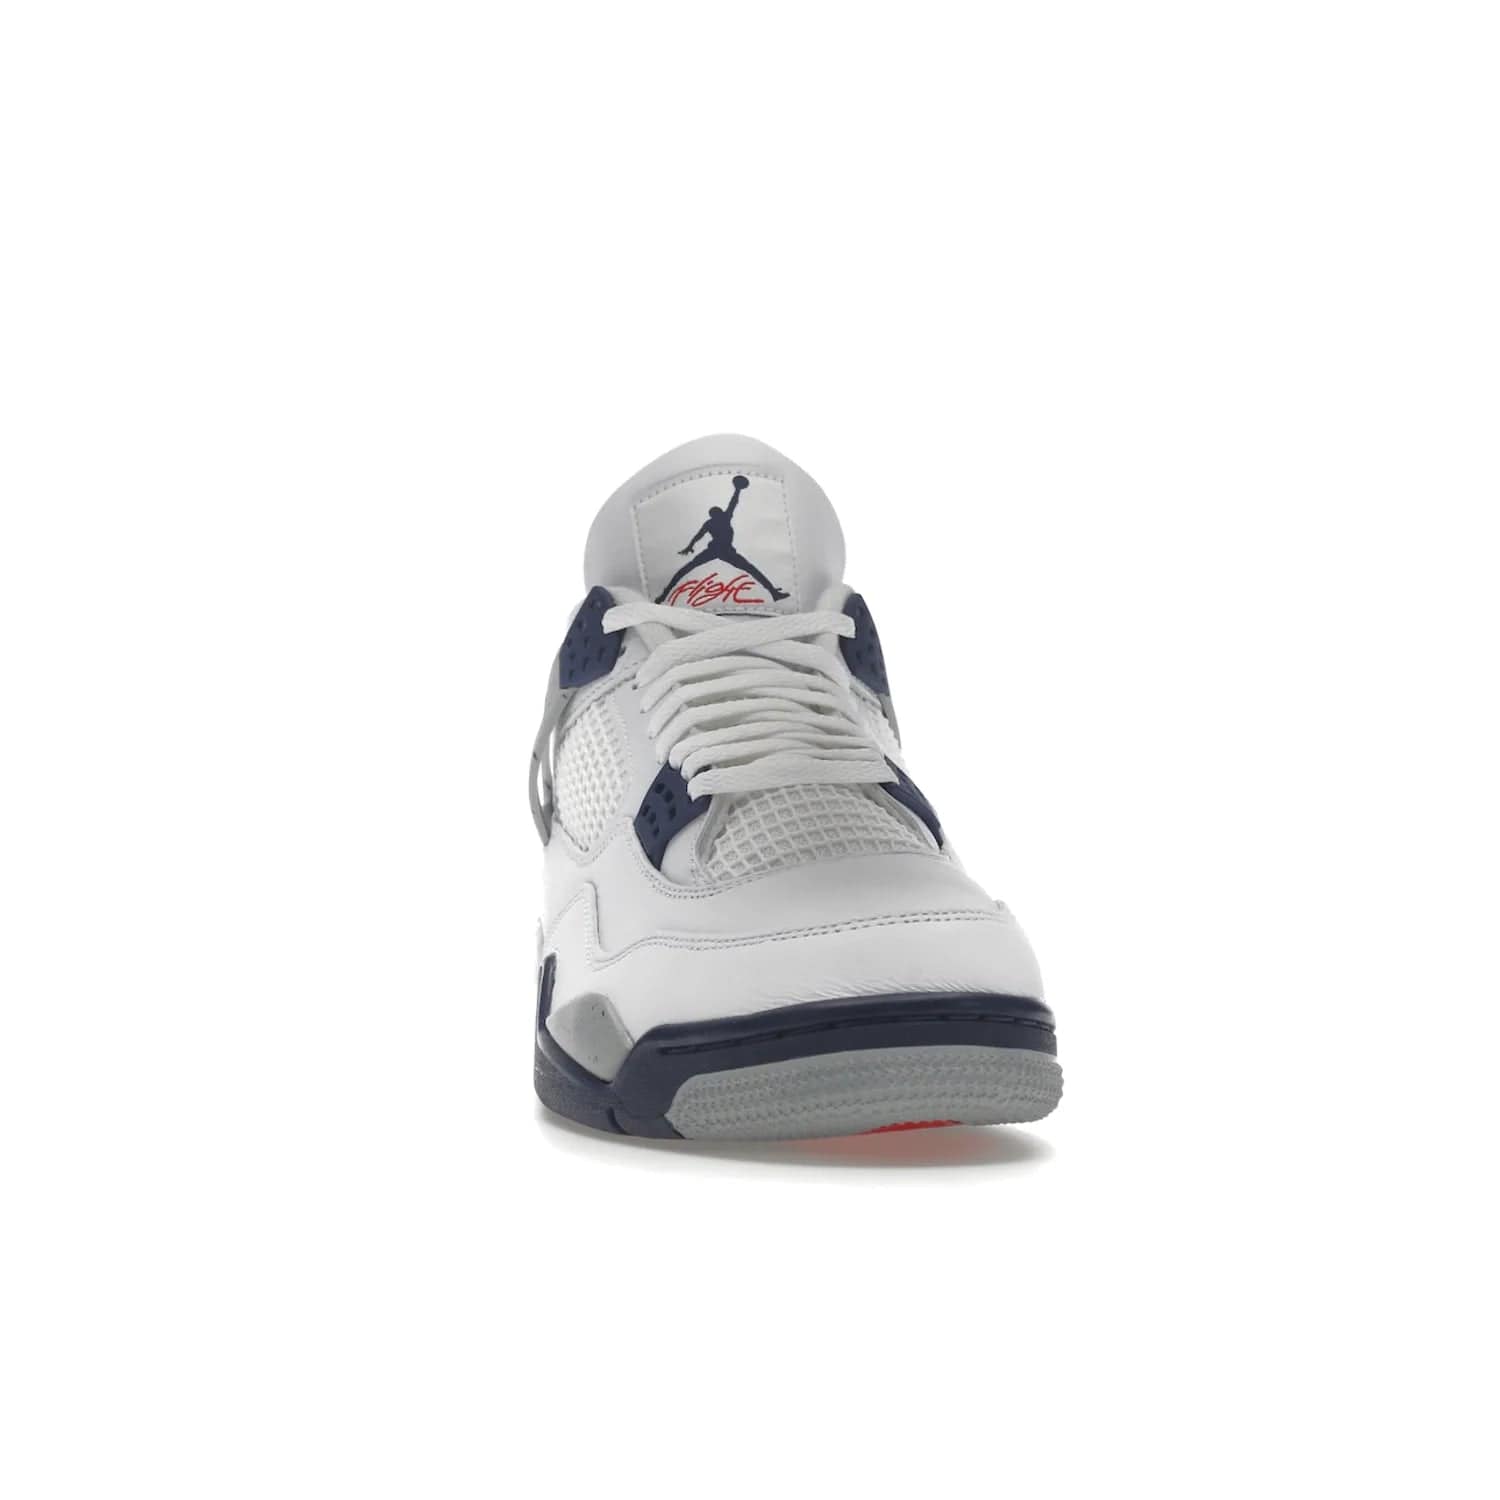 Jordan 4 Retro Midnight Navy - Image 9 - Only at www.BallersClubKickz.com - Shop the Air Jordan Retro 4 White Midnight Navy. Stand out with a classic white leather upper, black support wings, midnight navy eyelets, and Crimson Jumpman tongue tag. Unbeatable comfort with two-tone polyurethane midsole with encapsulated Air technology. Get yours before October 29th, 2022.